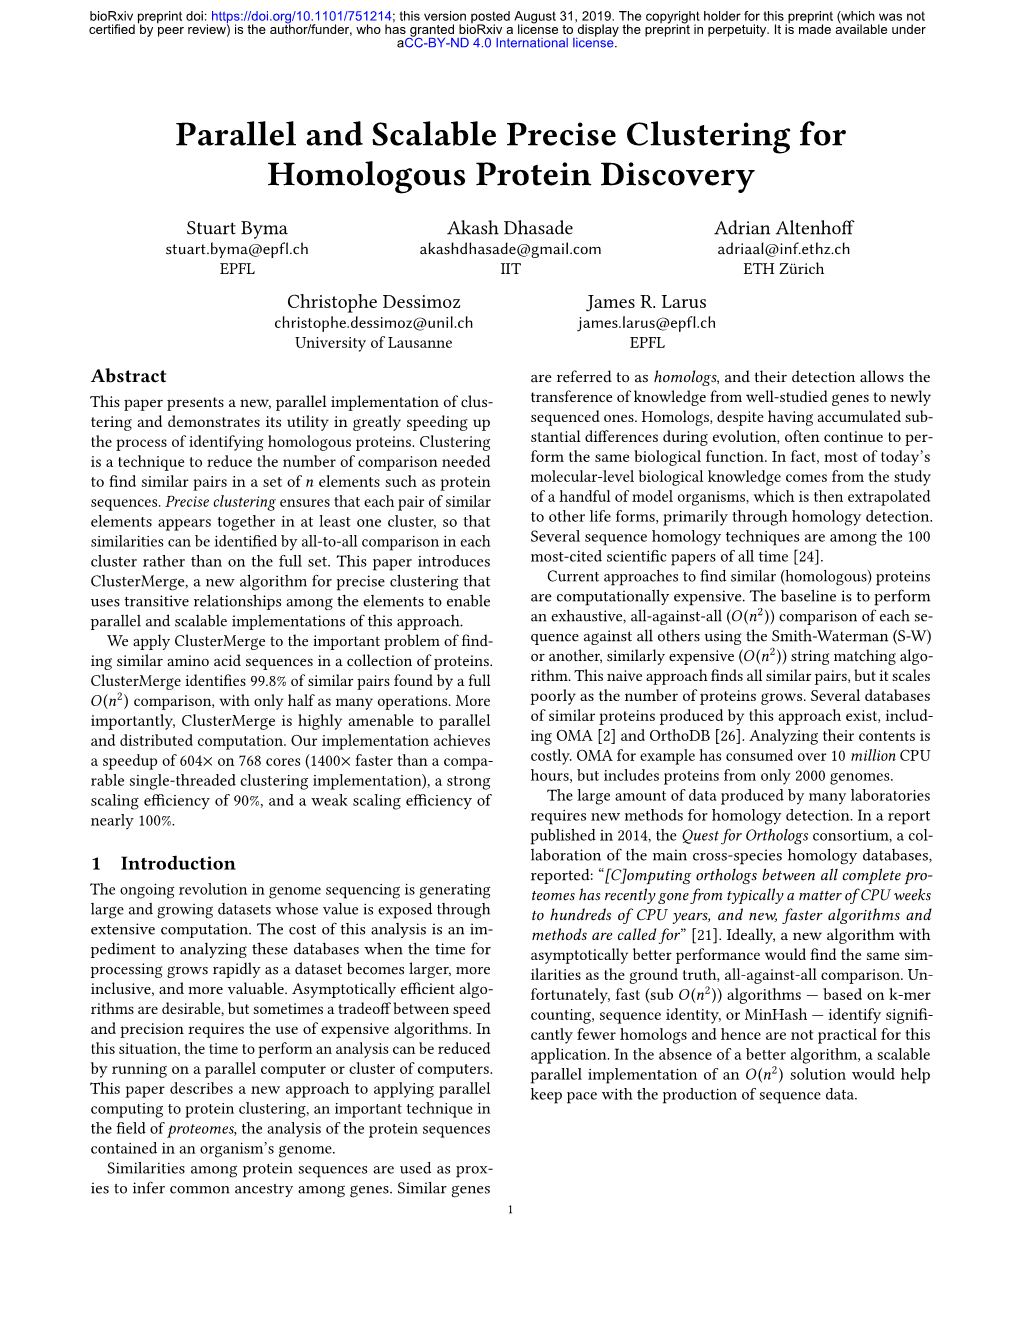 Parallel and Scalable Precise Clustering for Homologous Protein Discovery